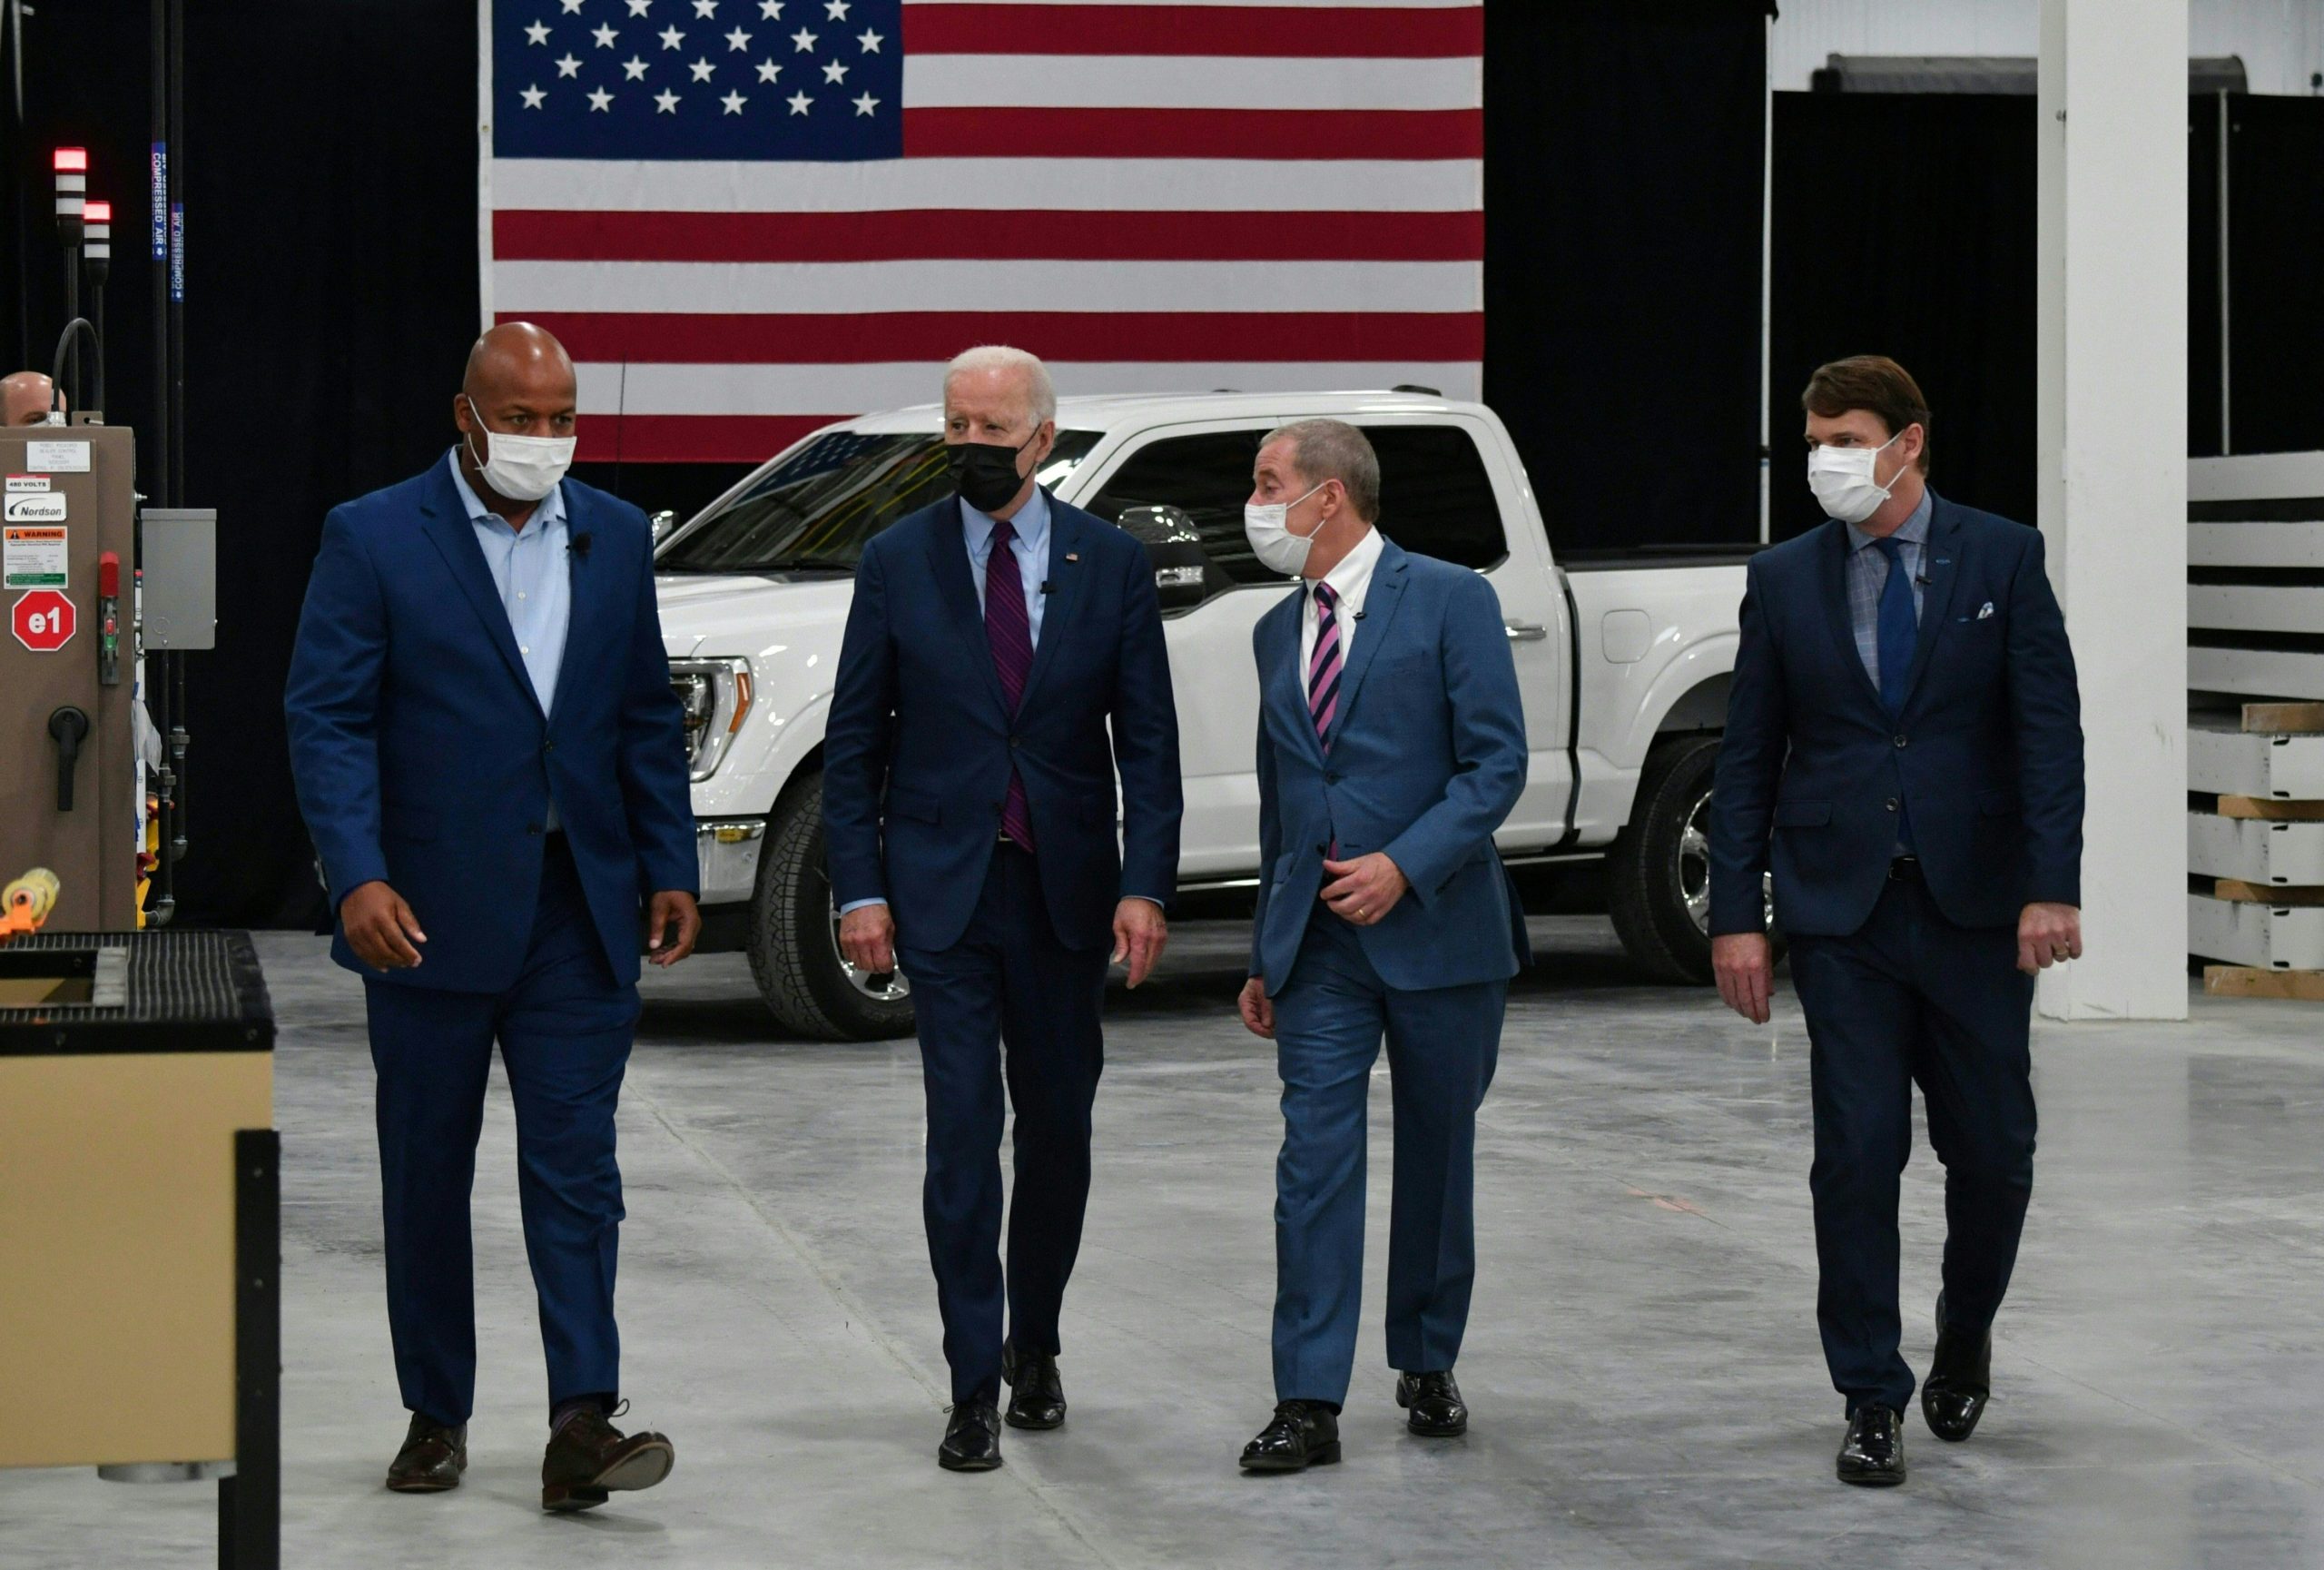 President Joe Biden tours of the Ford Rouge Electric Vehicle Center in Dearborn, Michigan, on May 18, 2021. (Nicholas Kamm/AFP via Getty Images)